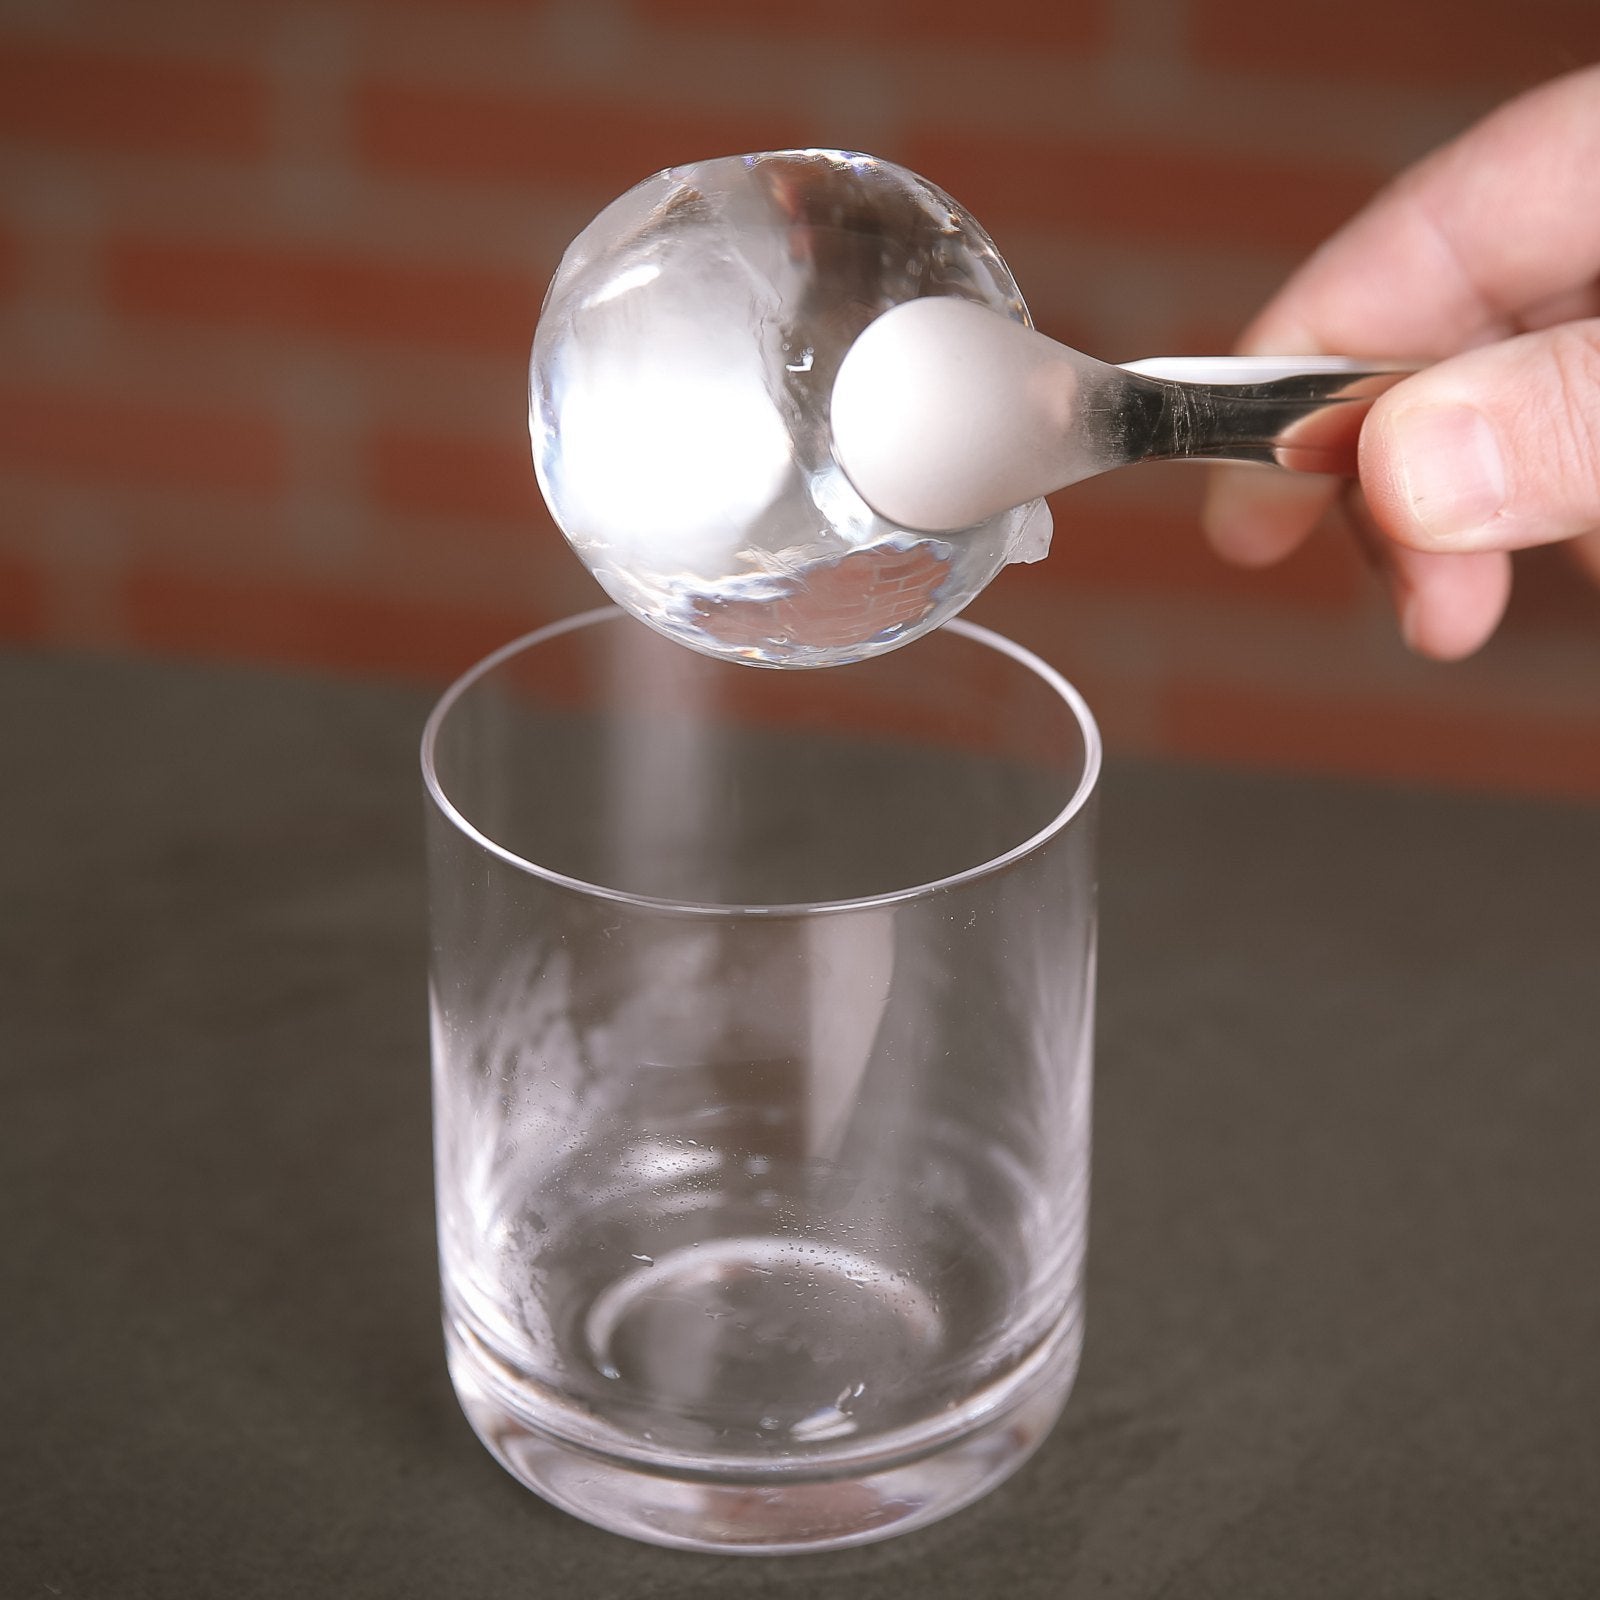 Clearsphere Ice Ball Maker